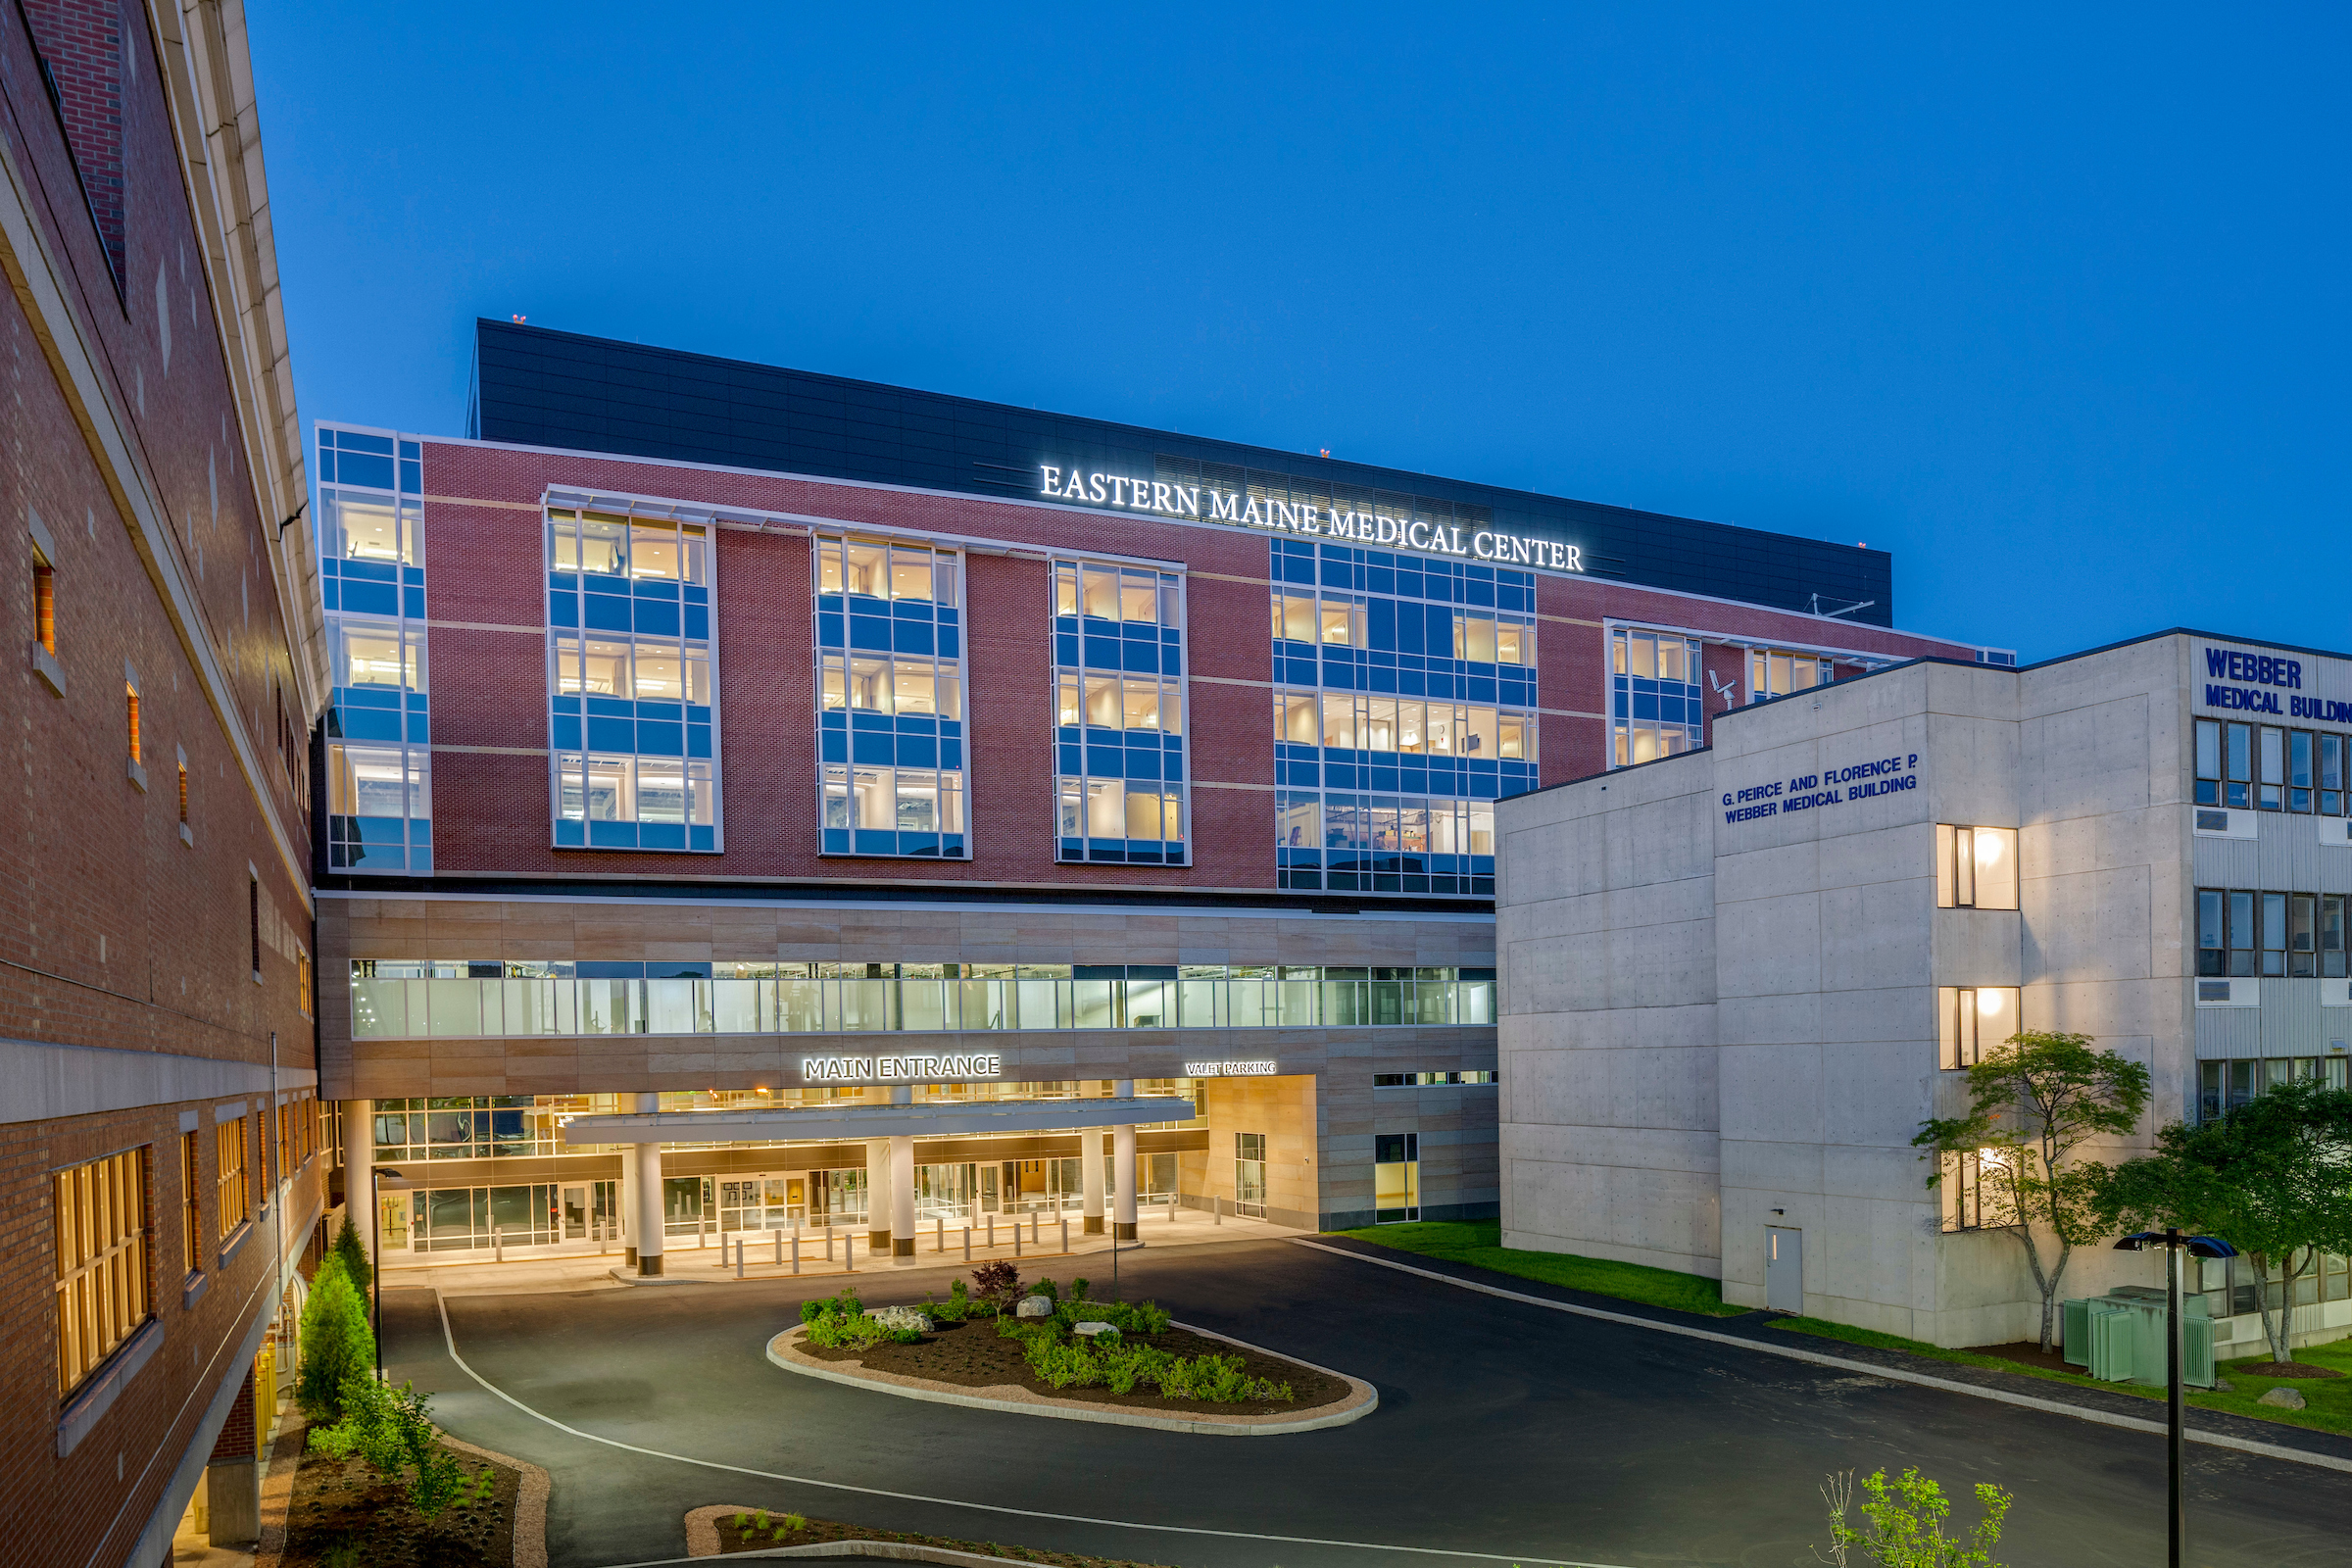 E4H designed building Eastern Maine Medical Center exterior with medical building to the right and trees surrounding it